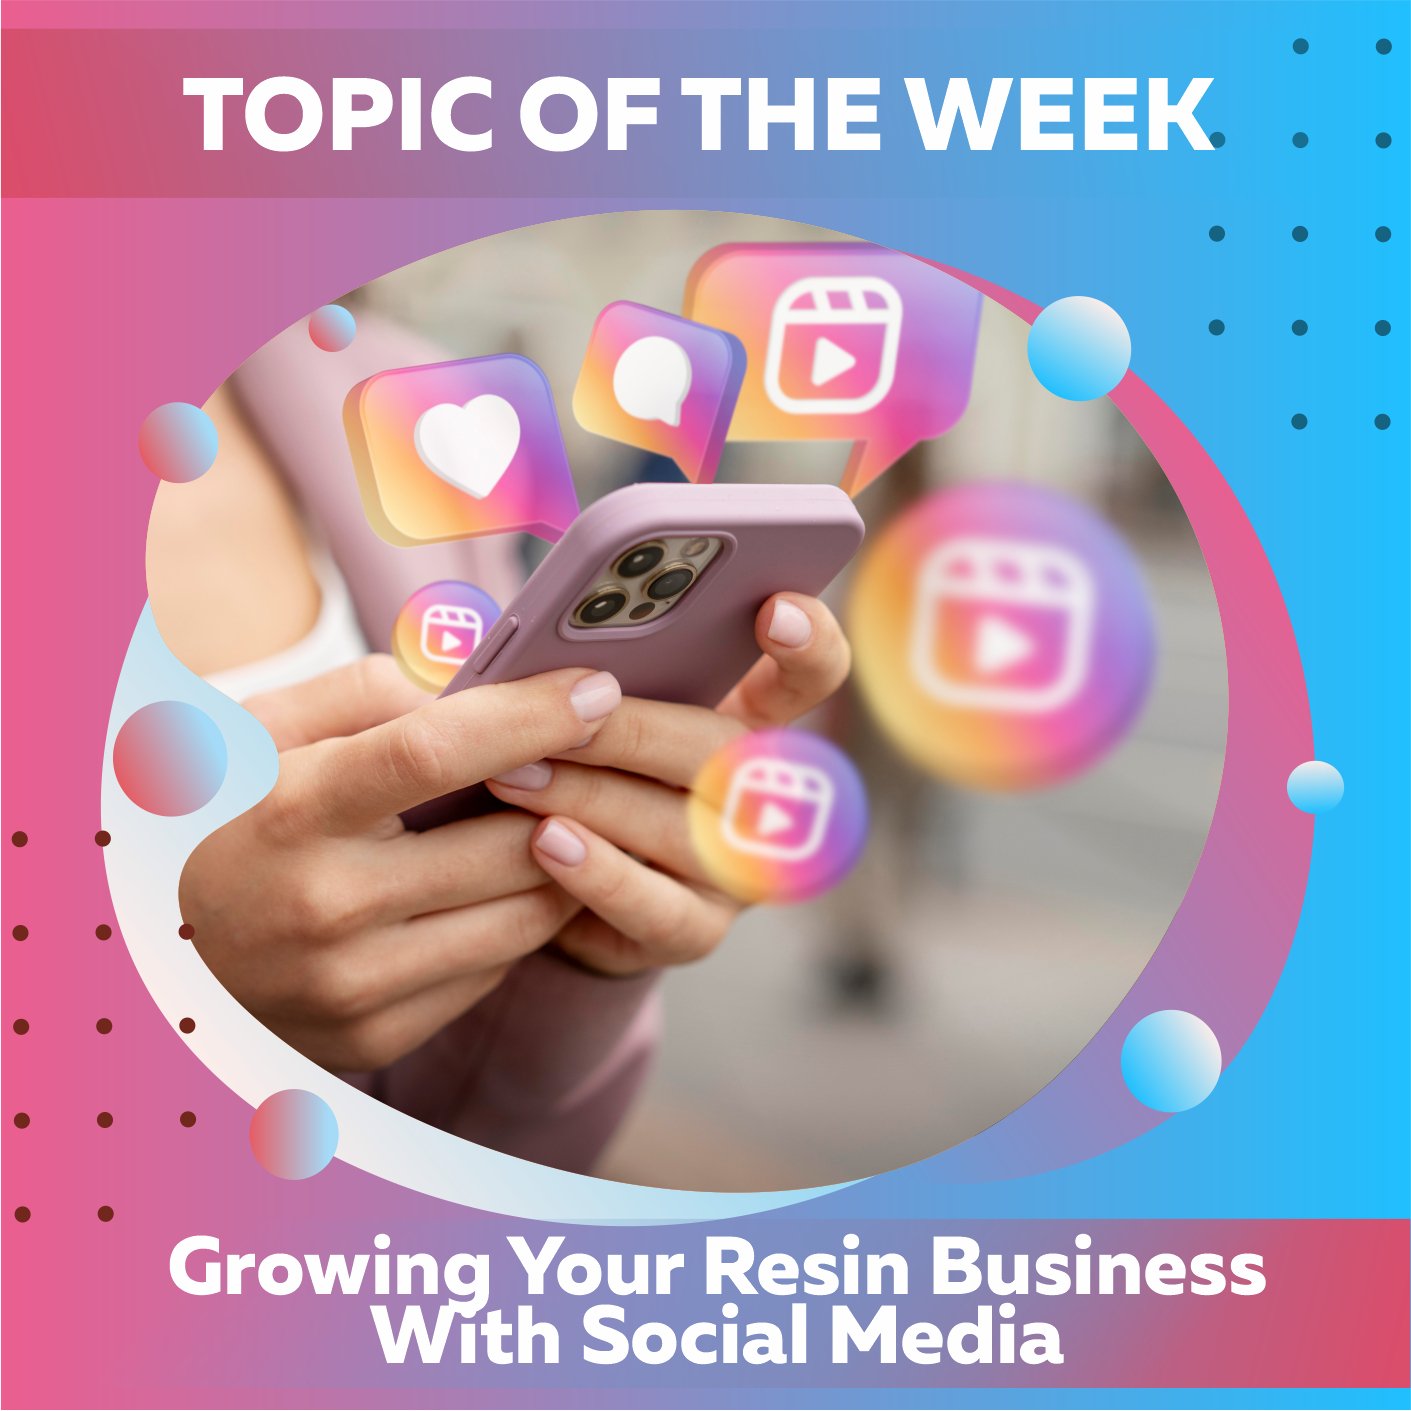 Growing Your Resin Business With Social Media - Craft Resin